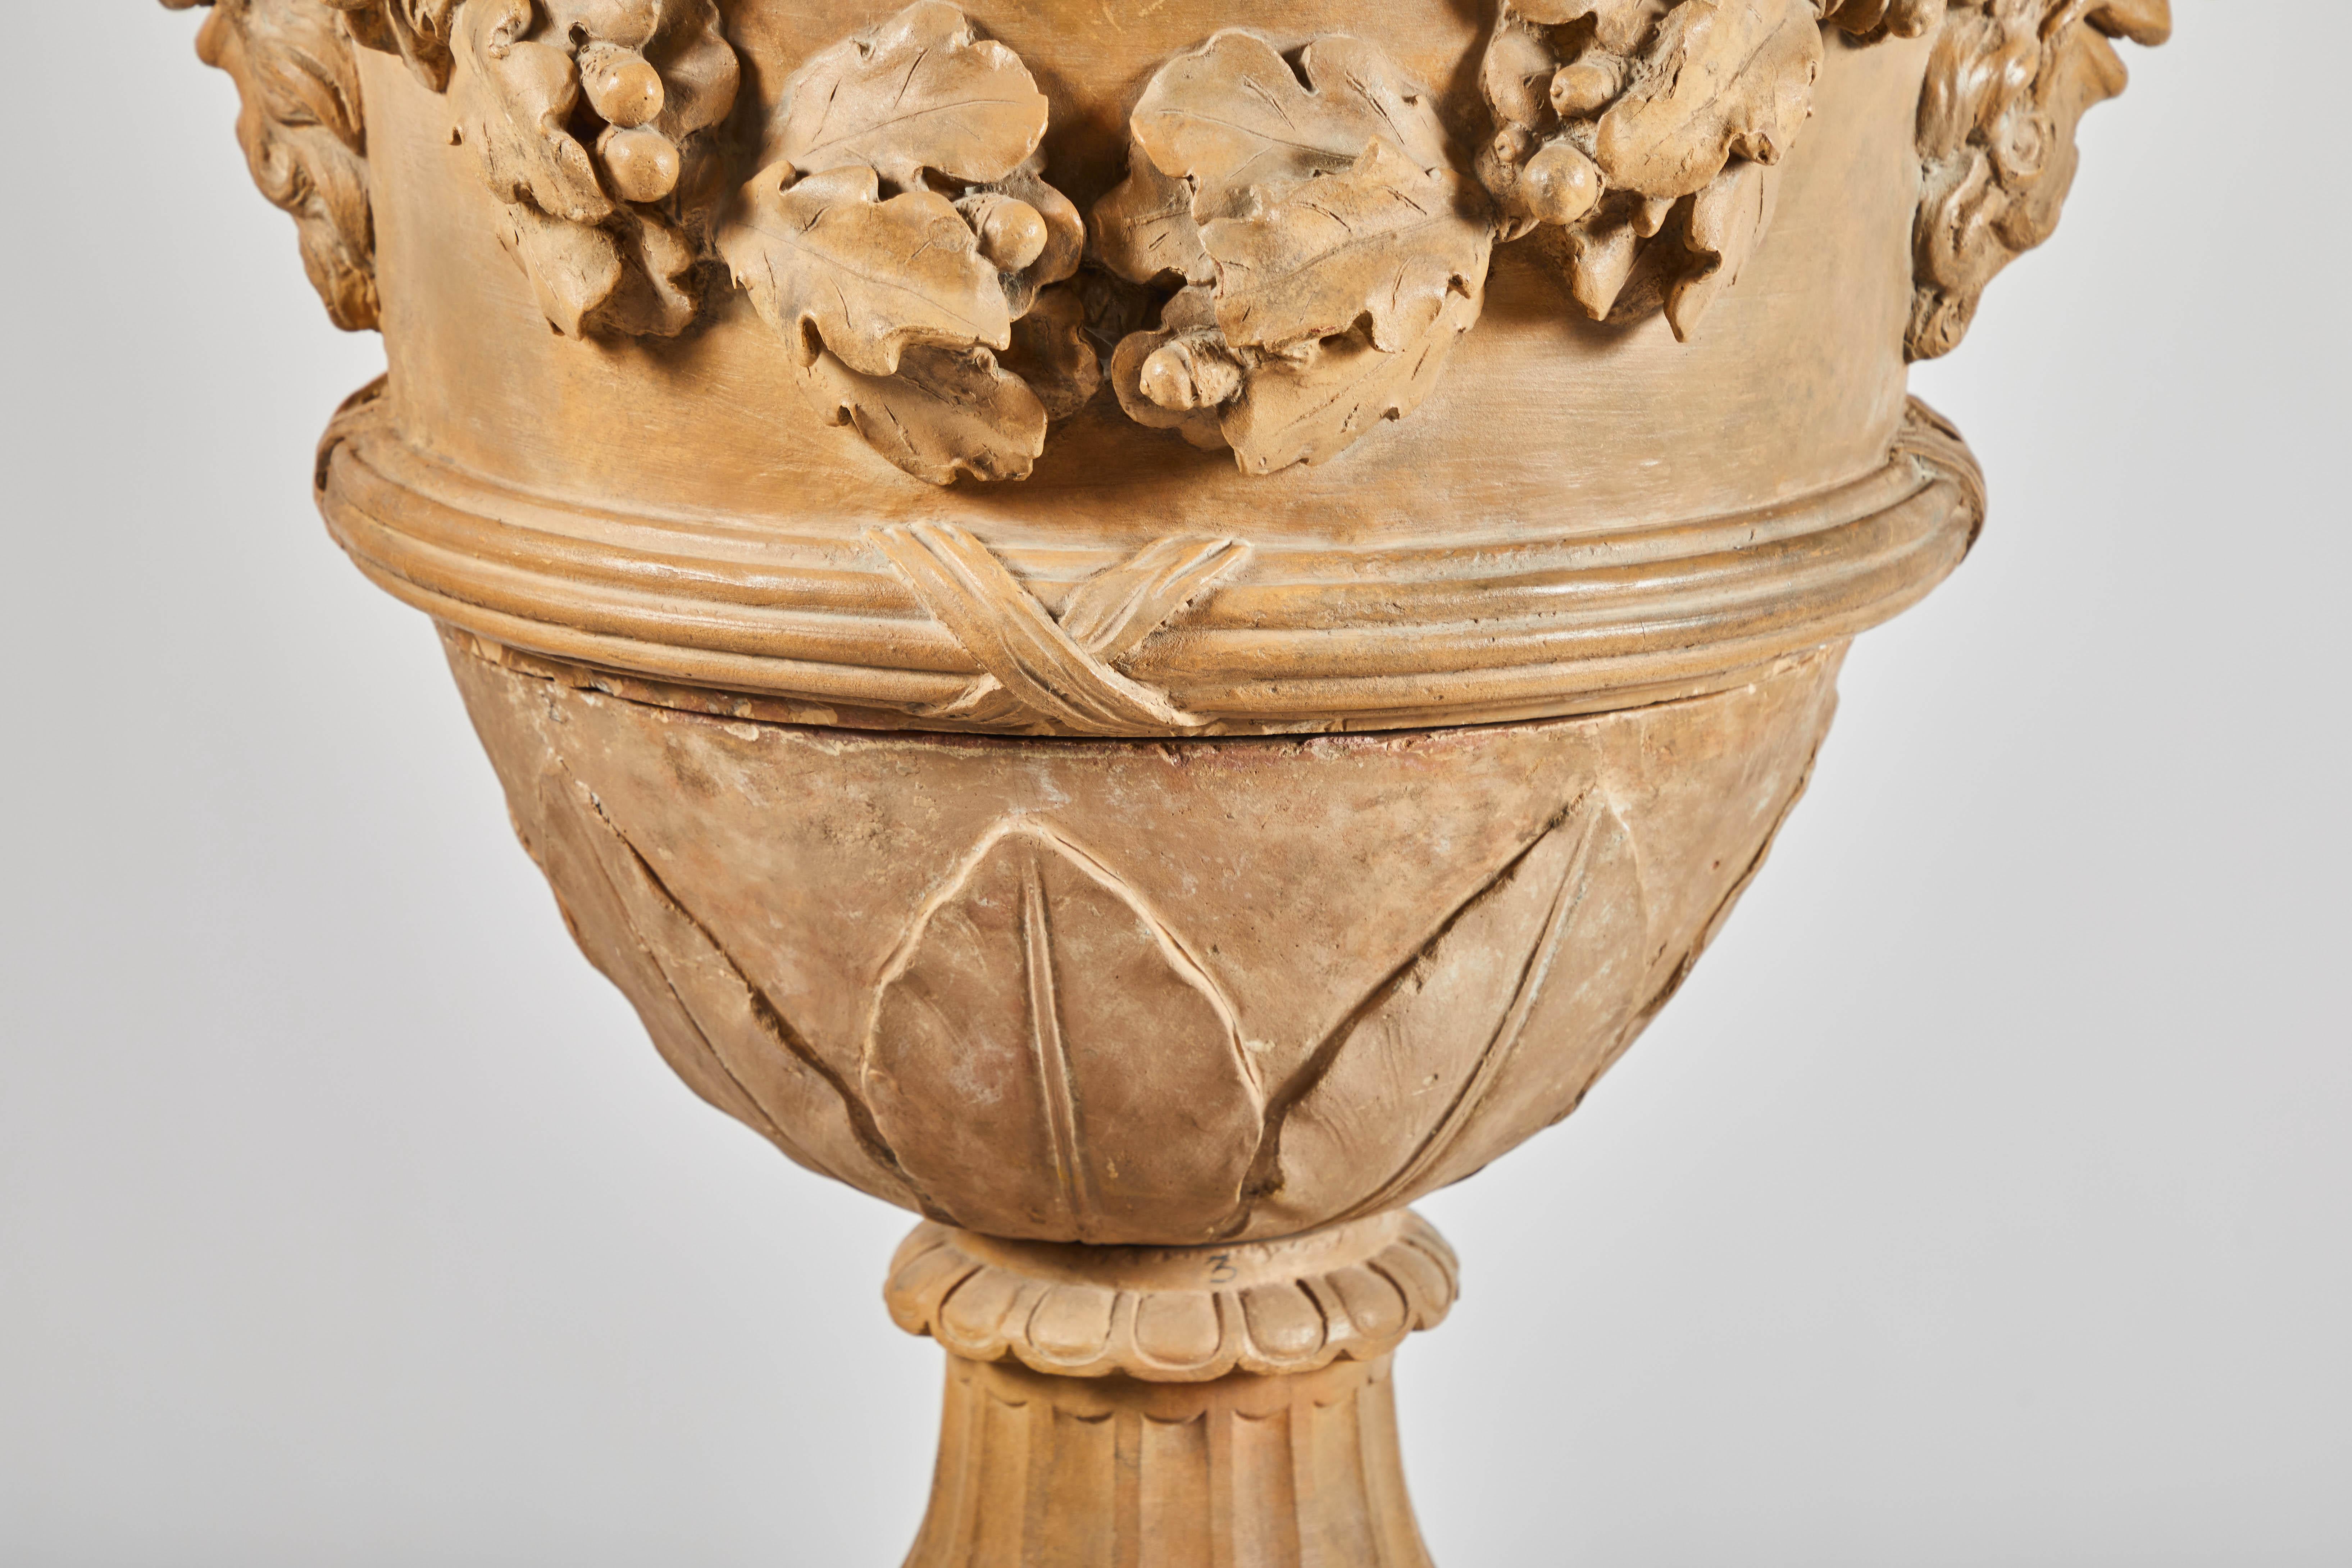 18th Century Terracotta Urns on Pedestals from the Collection of Karl Lagerfeld For Sale 2